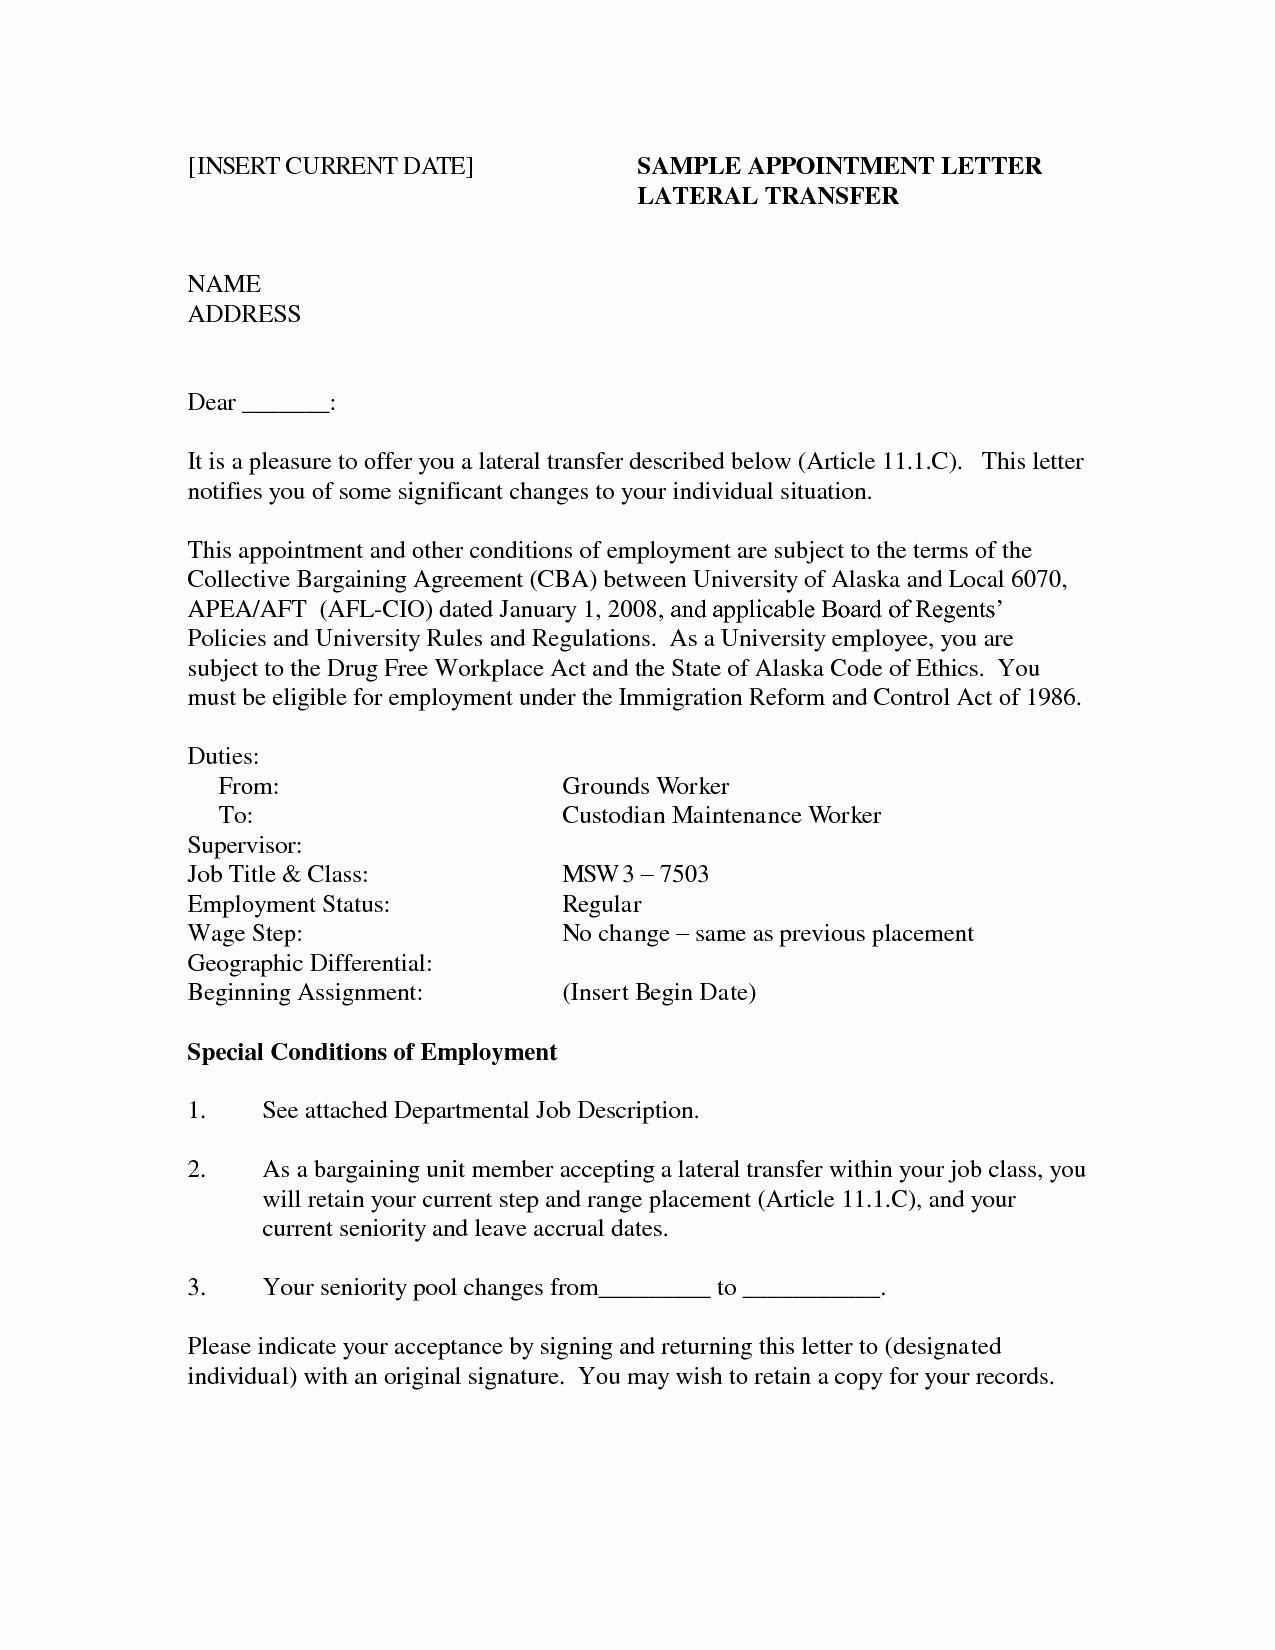 Sales Cover Letter Template Free - Unique Free Resume Cover Letter Templates